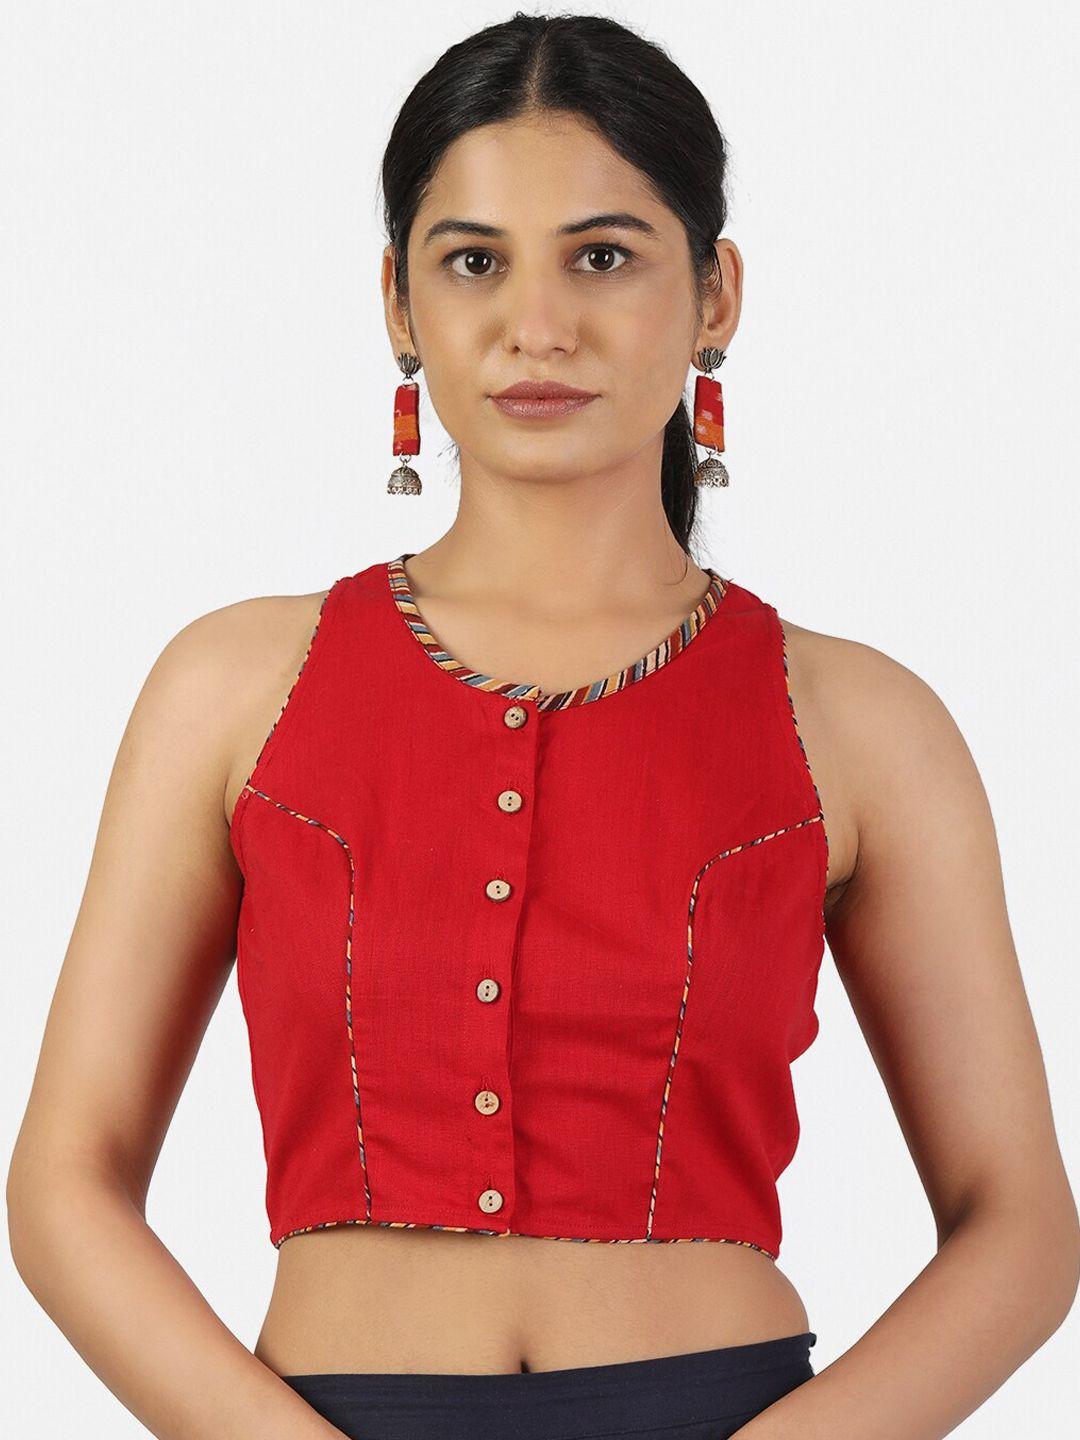 llajja women red solid pure cotton saree blouse